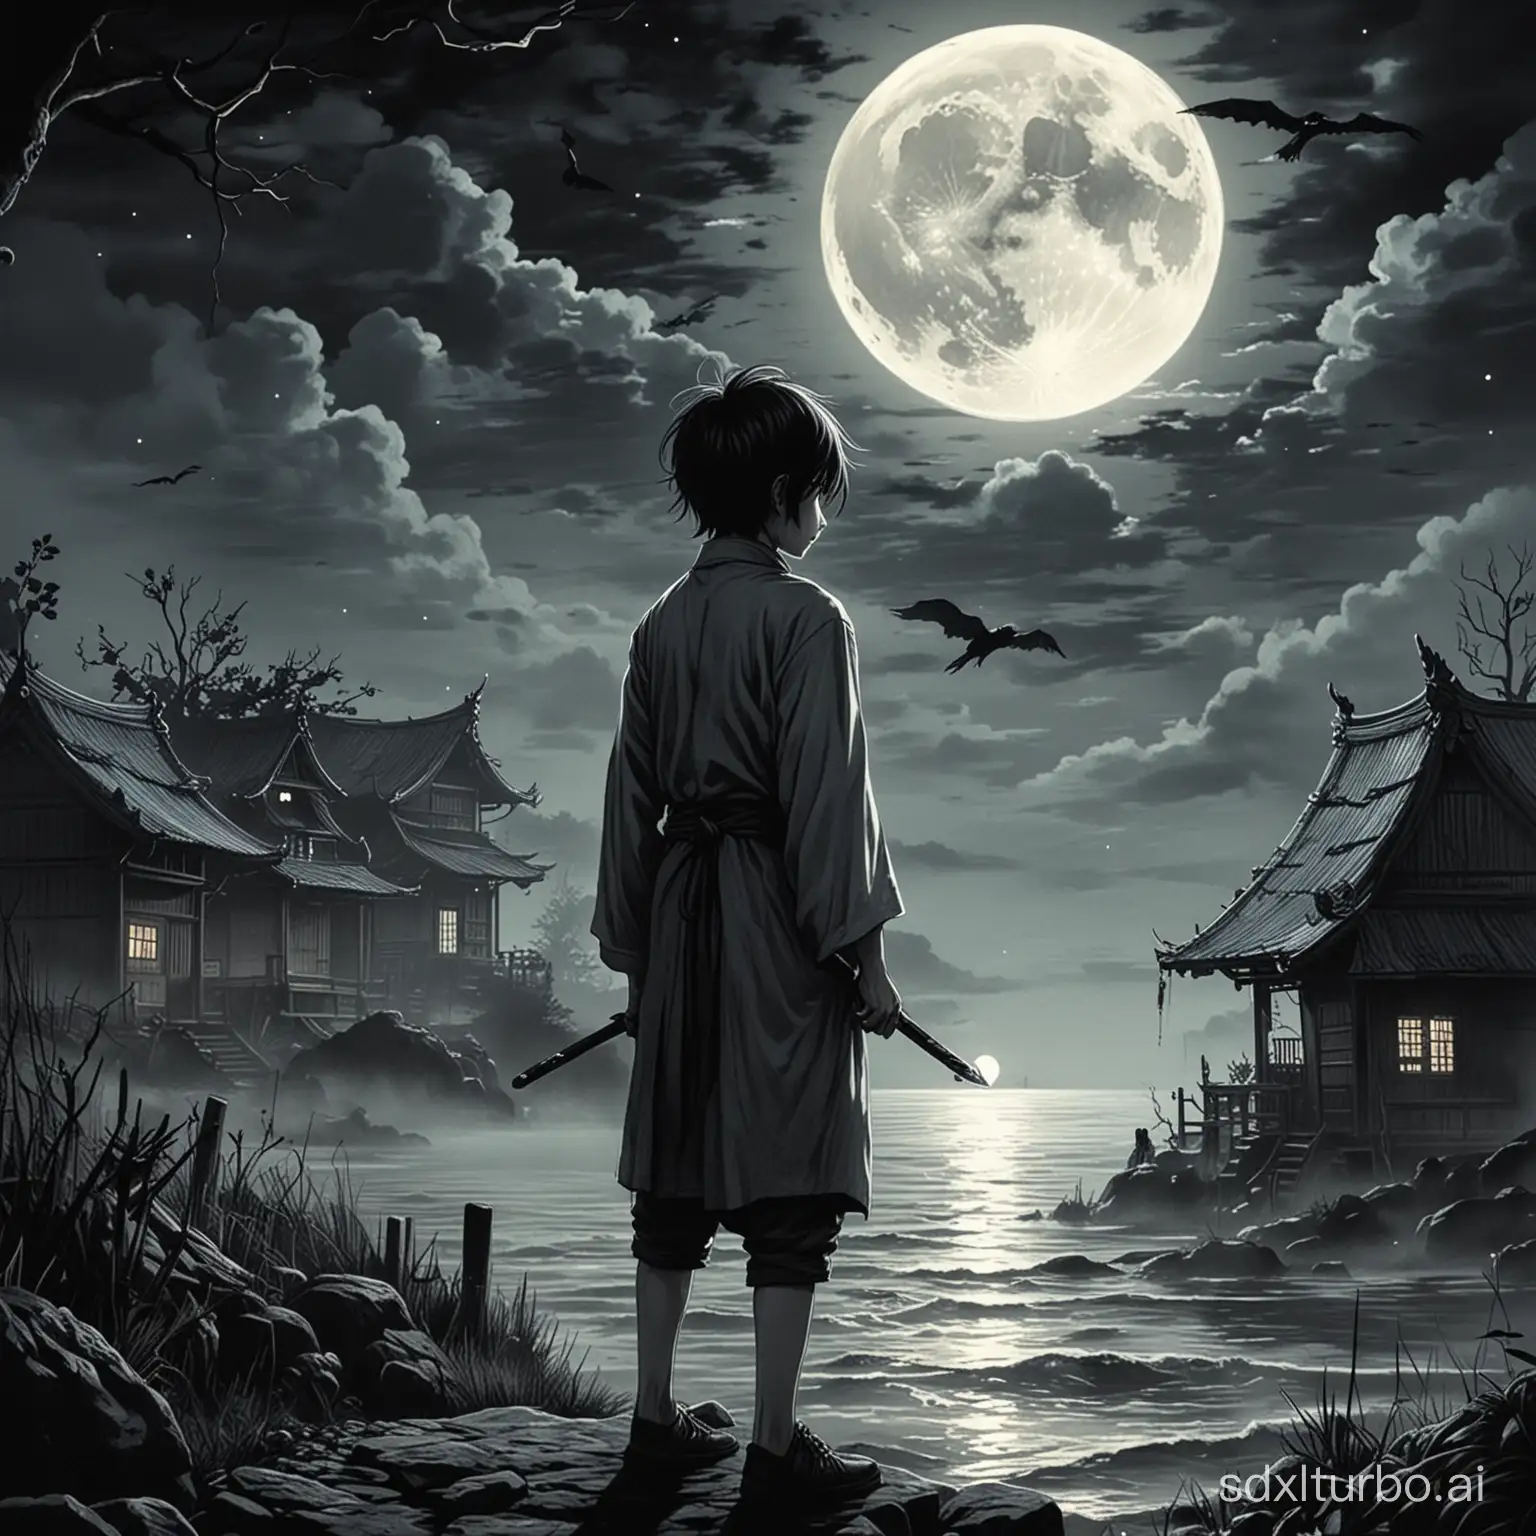 Eerie-Night-Tale-of-a-Talented-Manga-Artist-and-His-Haunting-Creations